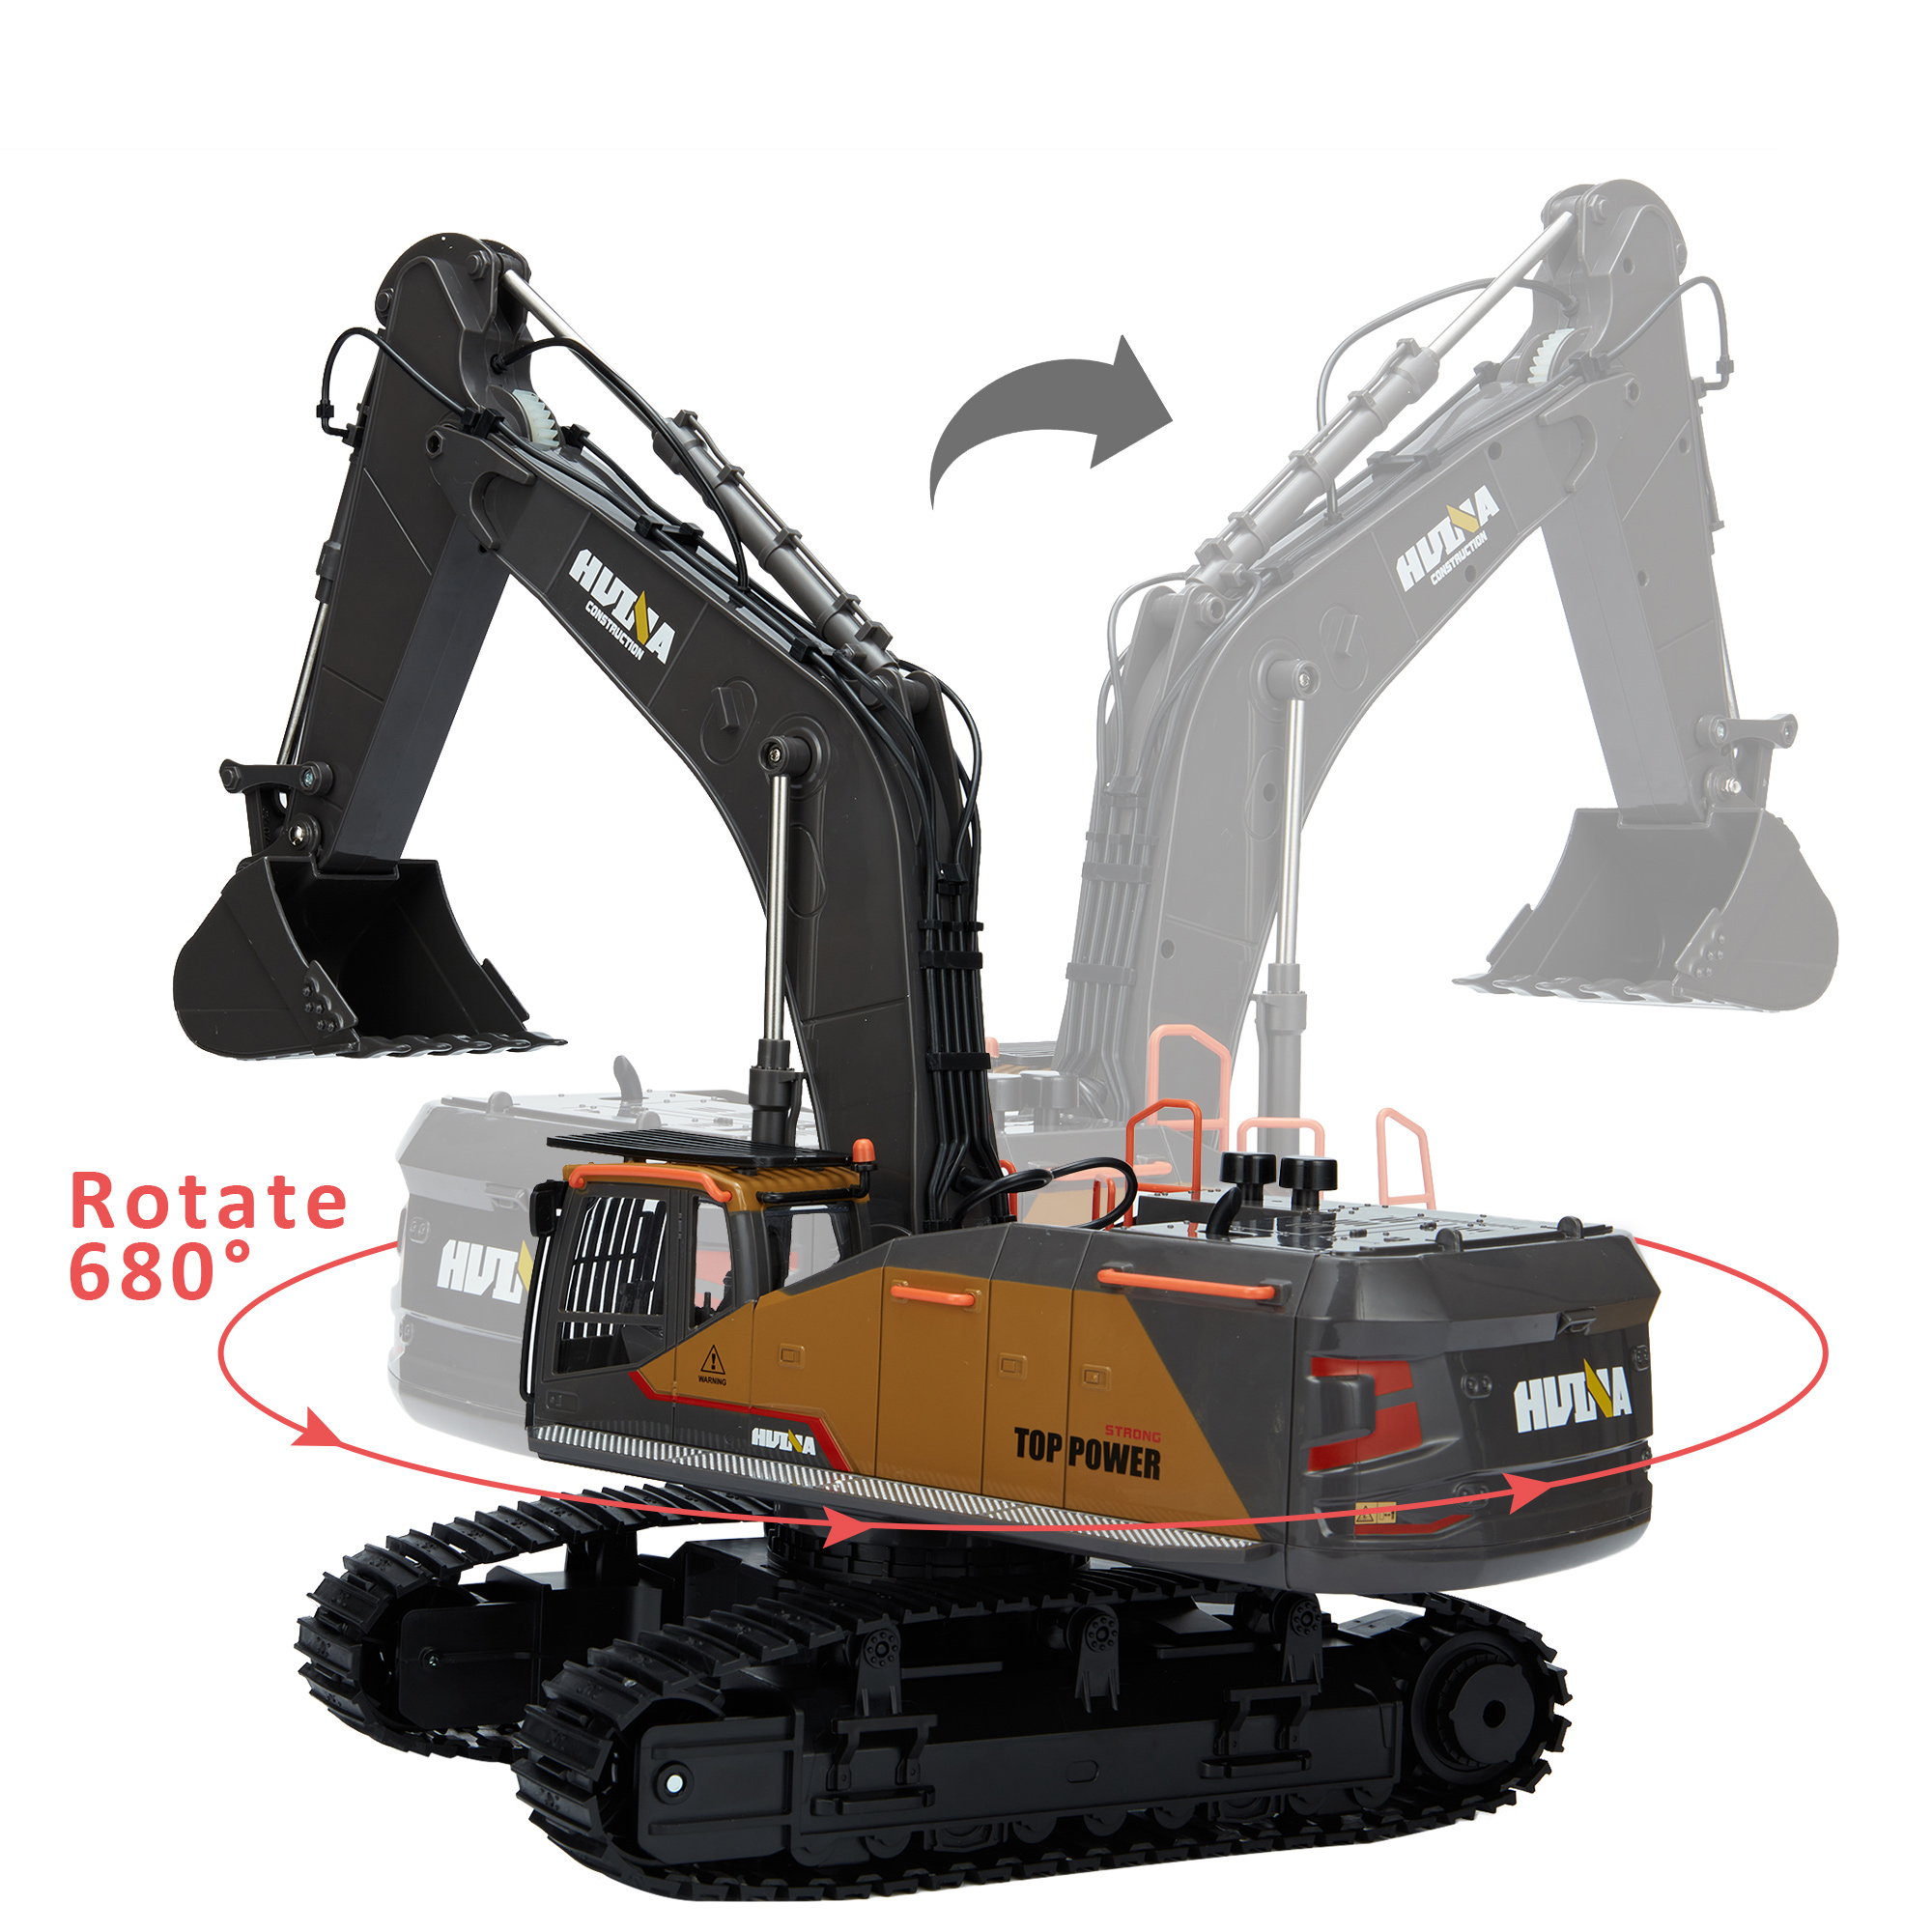 RC Excavator Truck, 2.4Ghz 22 Channels RC Engineering Vehicle Excavator, 1:14 Mini RC Truck Rechargeable Simulated Vehicle with Remote Controller Kids For Boys Birthday  Toy - image 4 of 8